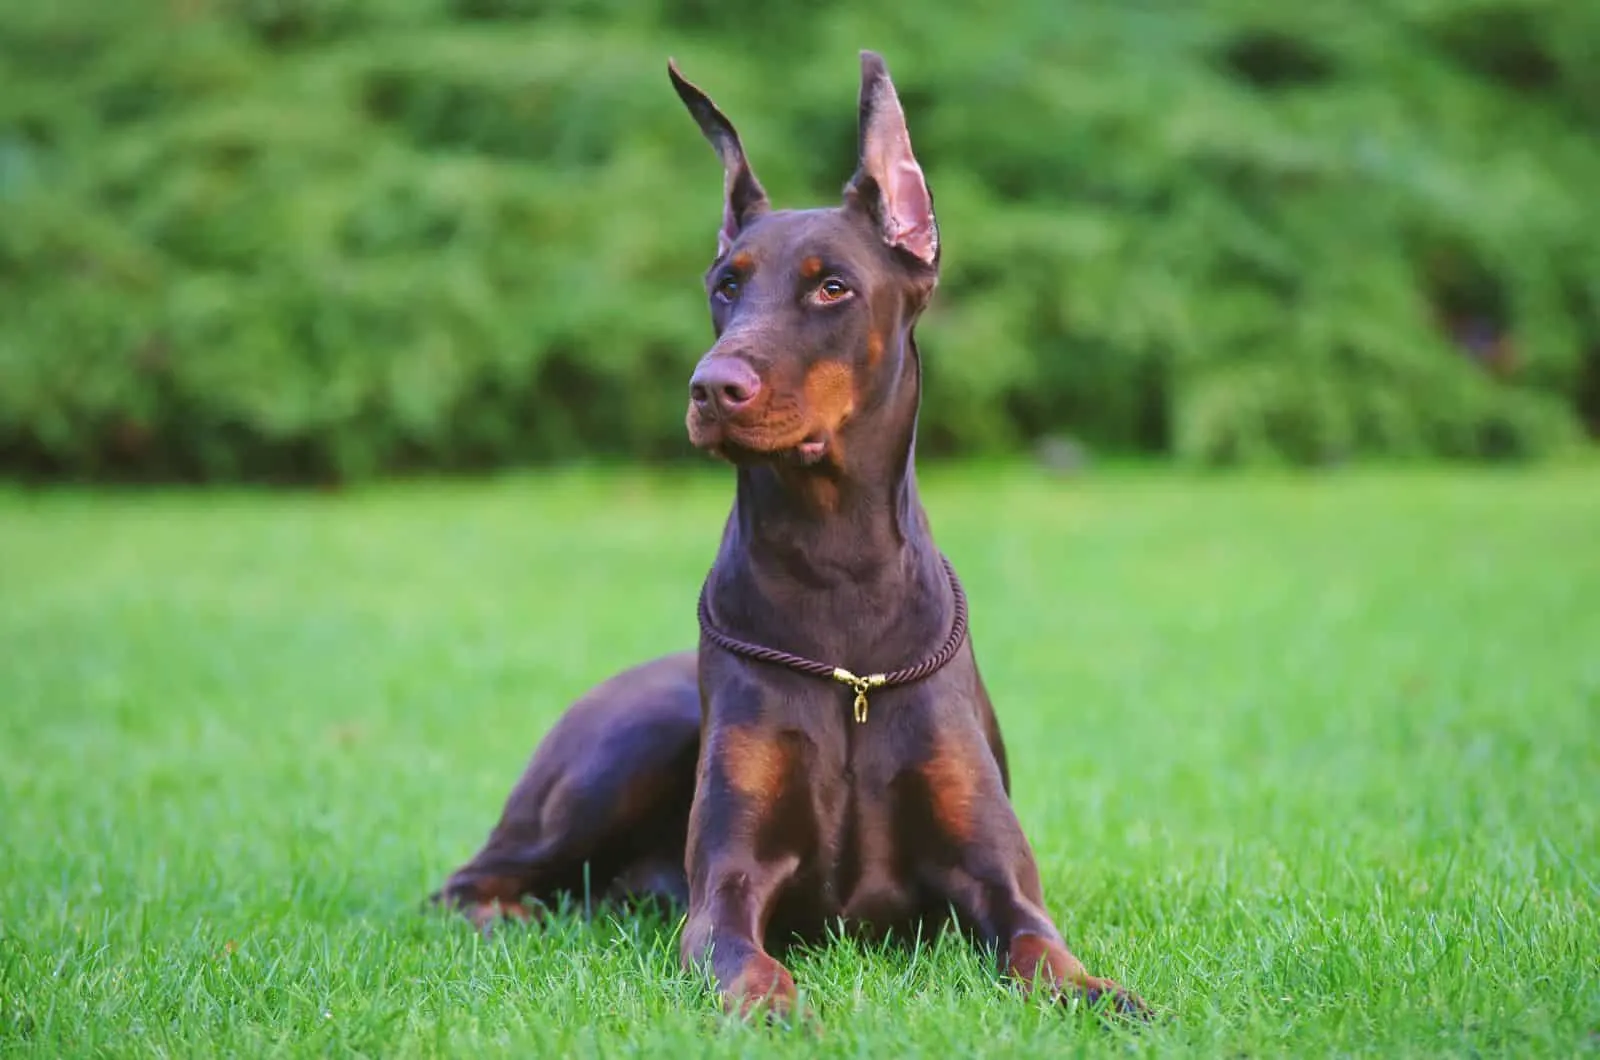 Doberman dog with the necklace